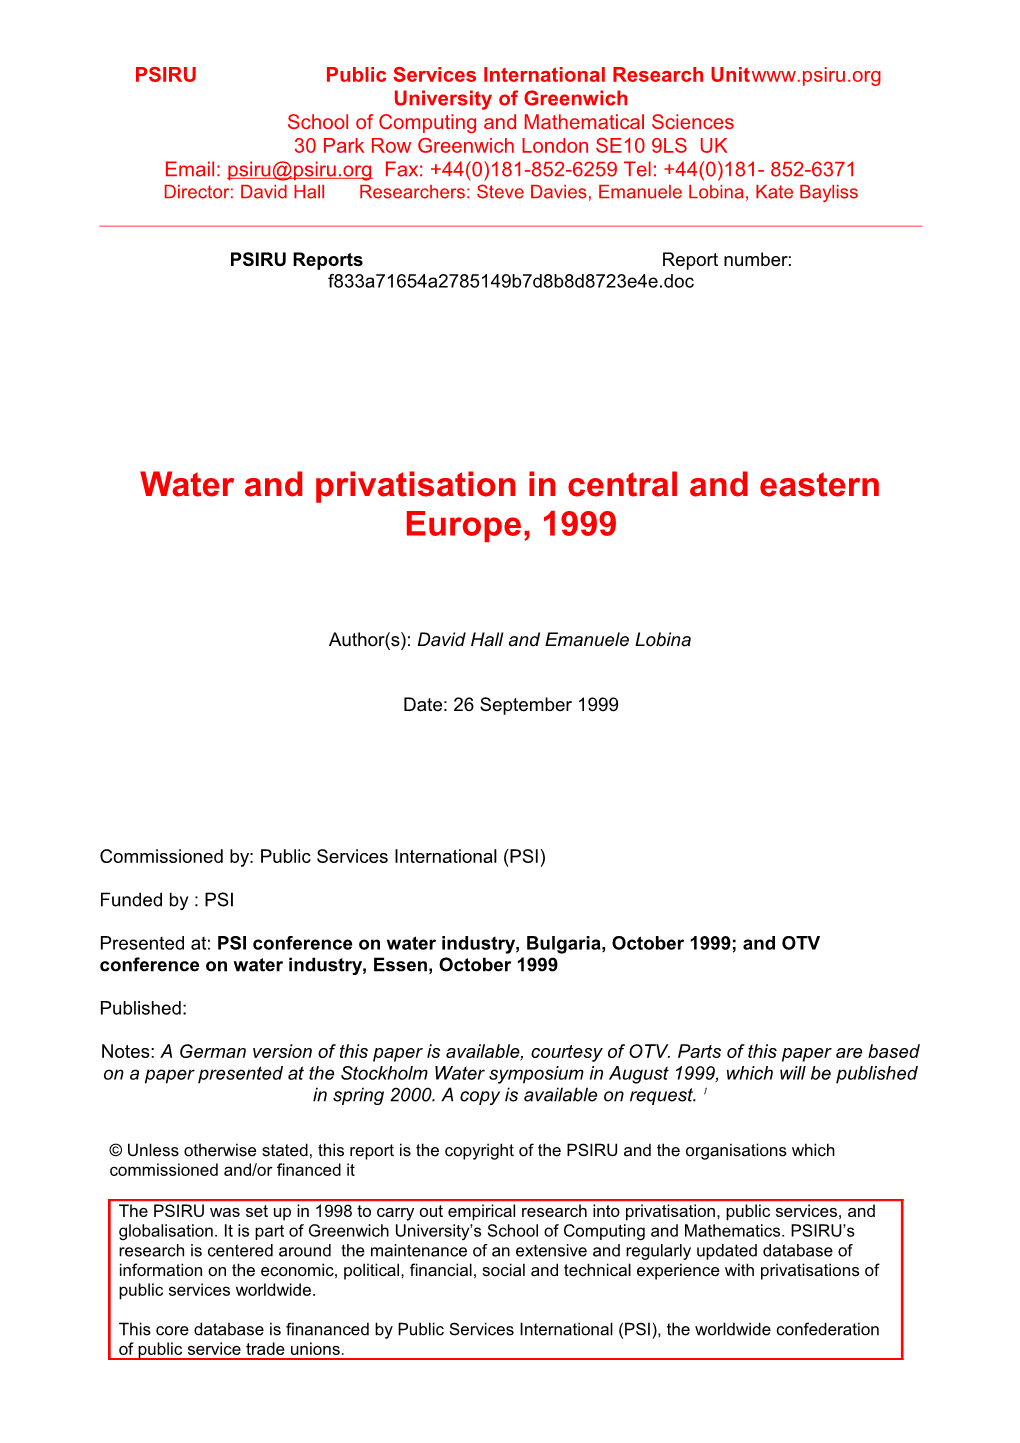 Water and Privatisation in Central and Eastern Europe, 1999